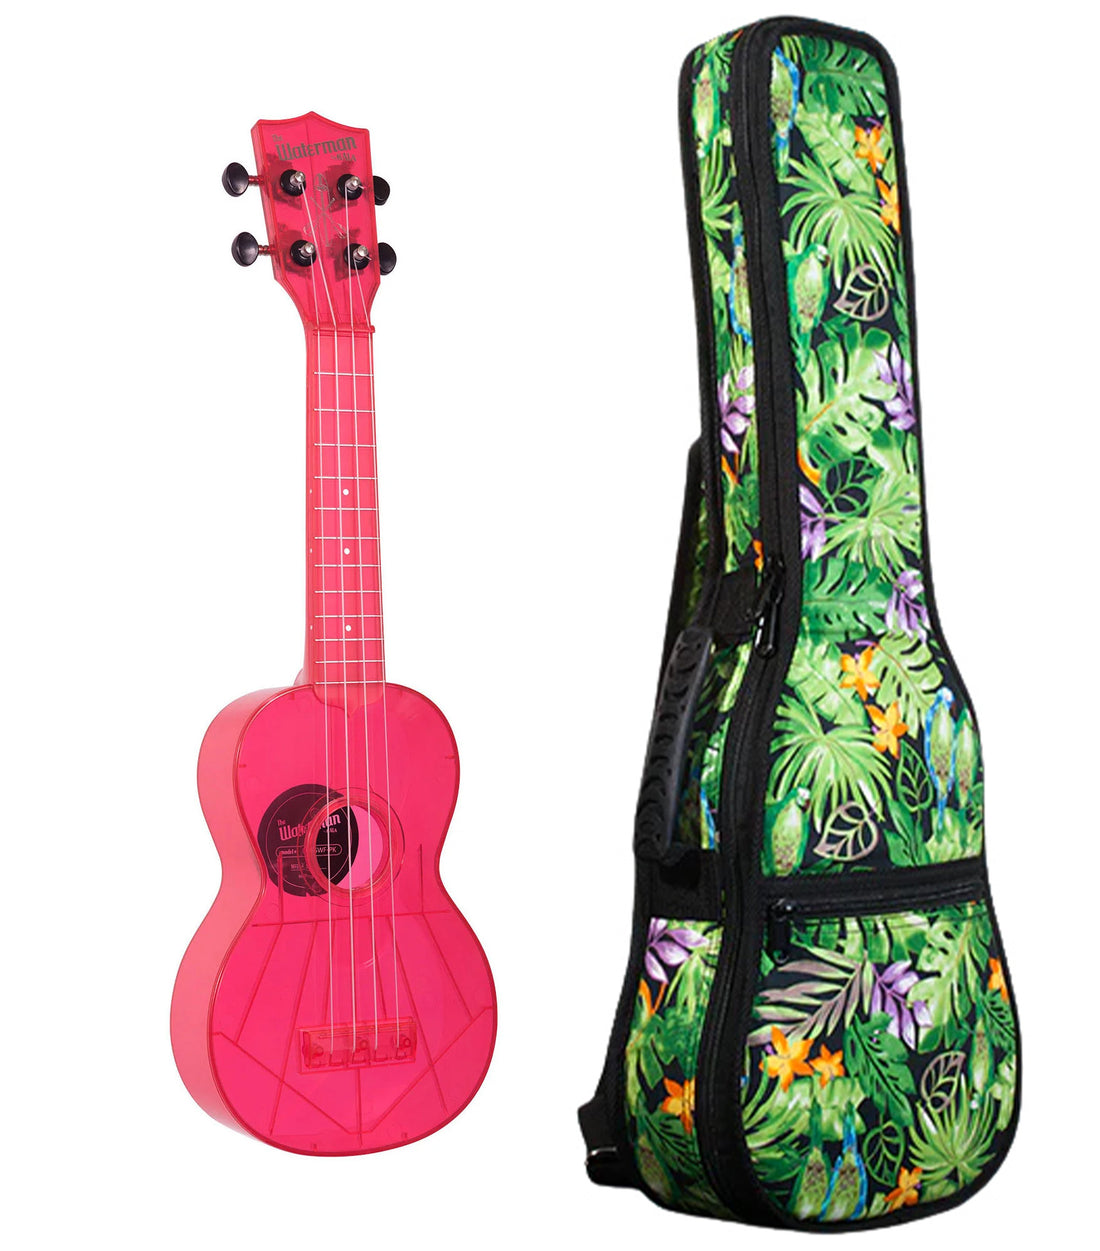 KA-SWF/PK Fluorescent Watermelon Pink Soprano Waterman Includes Gigbag Floral Print, Padded with Backpack Straps